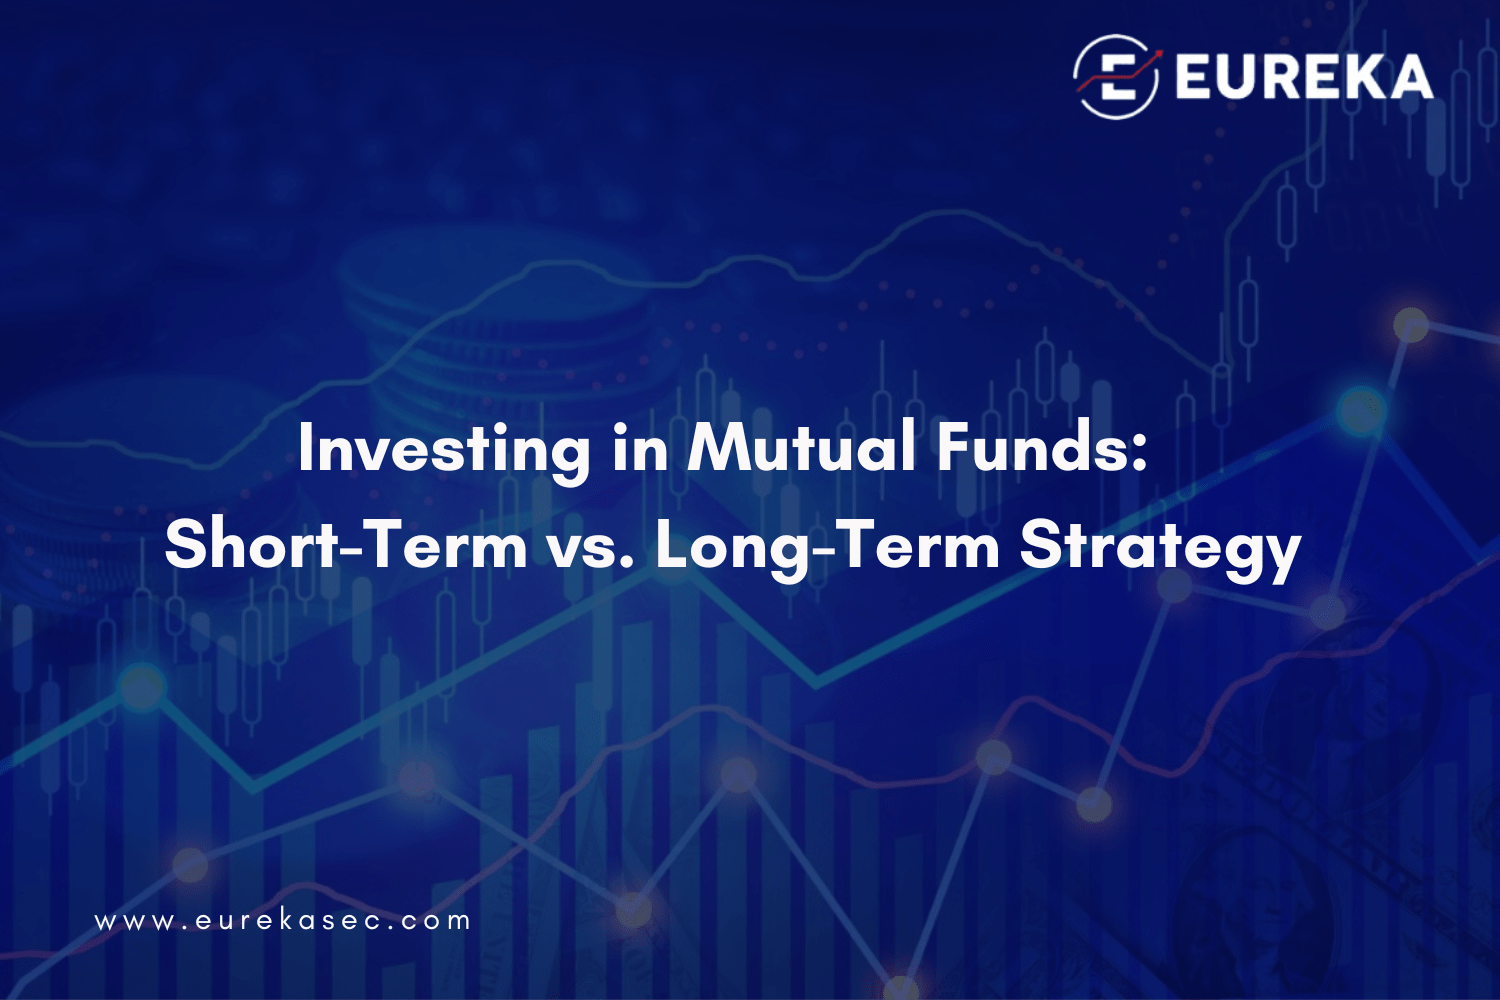 Investing in Mutual Funds: Short-Term vs. Long-Term Strategy